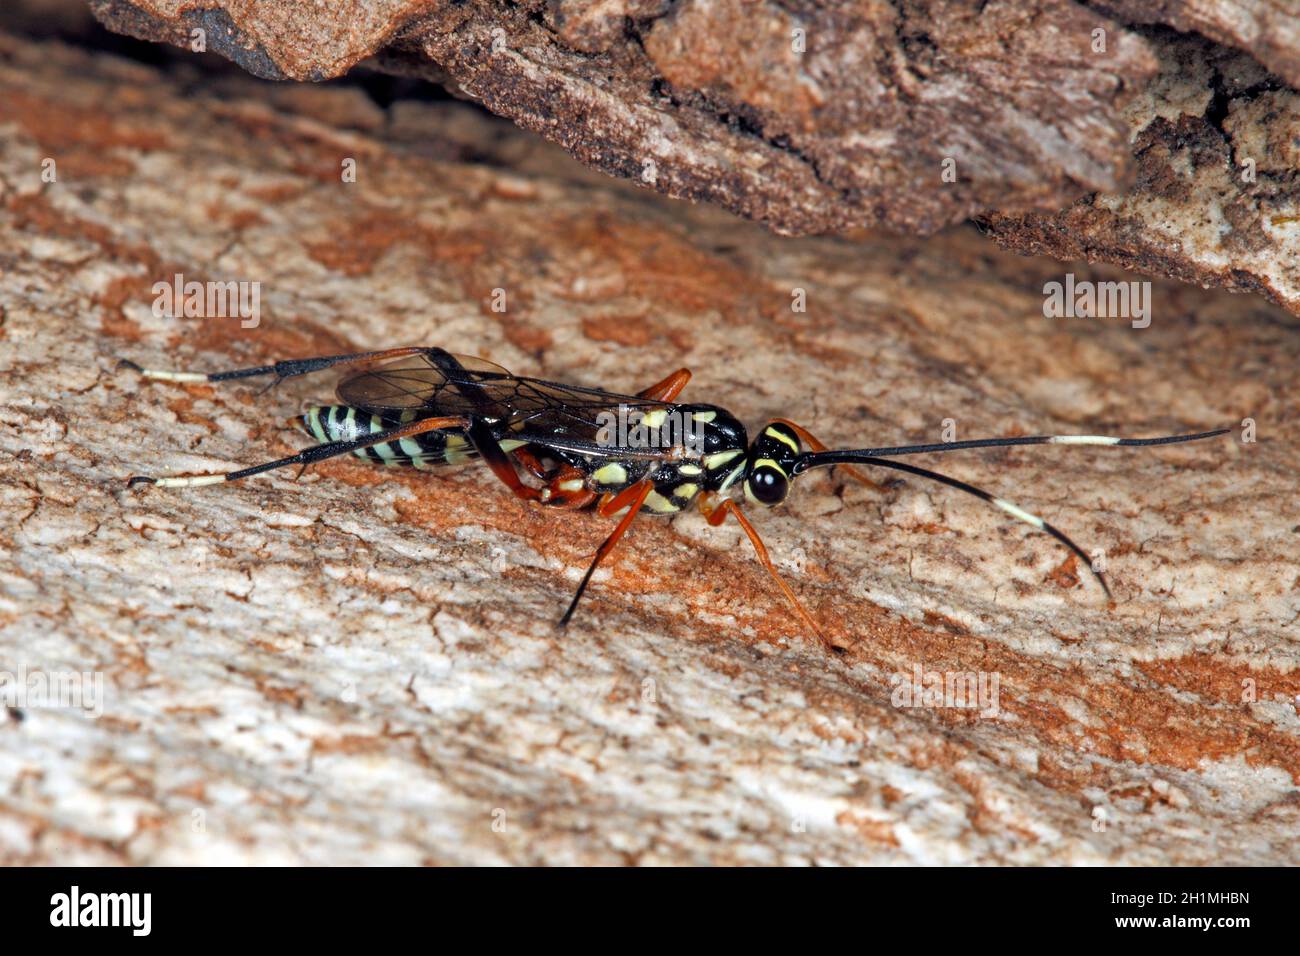 BANded Ichneumon Wasp, Gotra sp. Noto anche come Banded Pupa parassita Wasp. Coffs Harbour, New South Wales, Australia Foto Stock